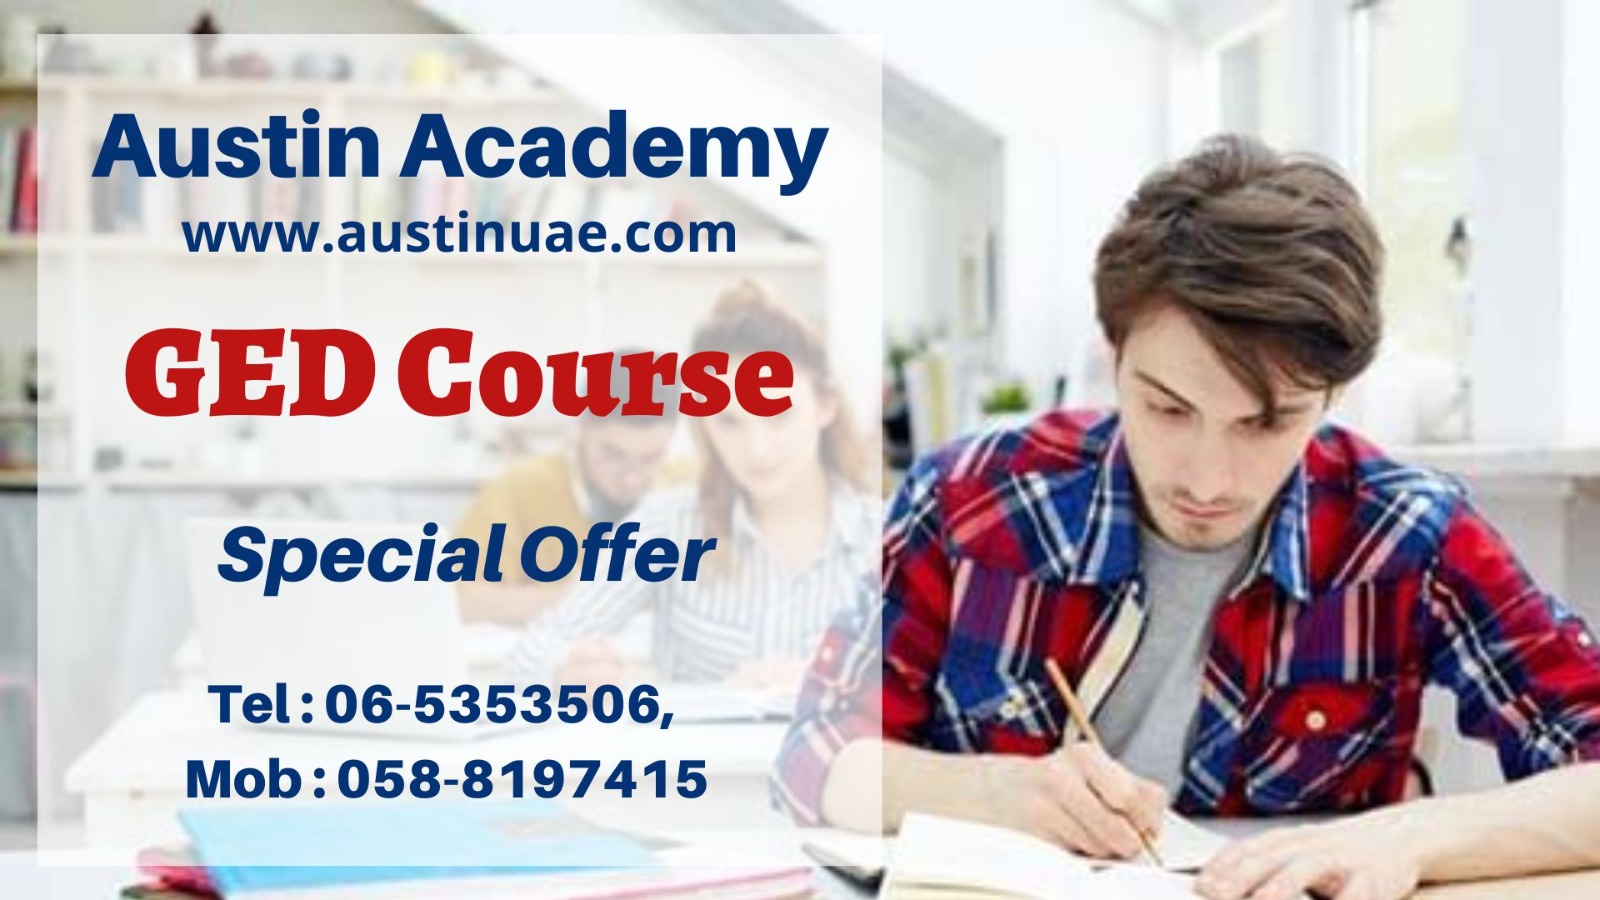 GED Classes in Sharjah with an amazing Offer 05645459060